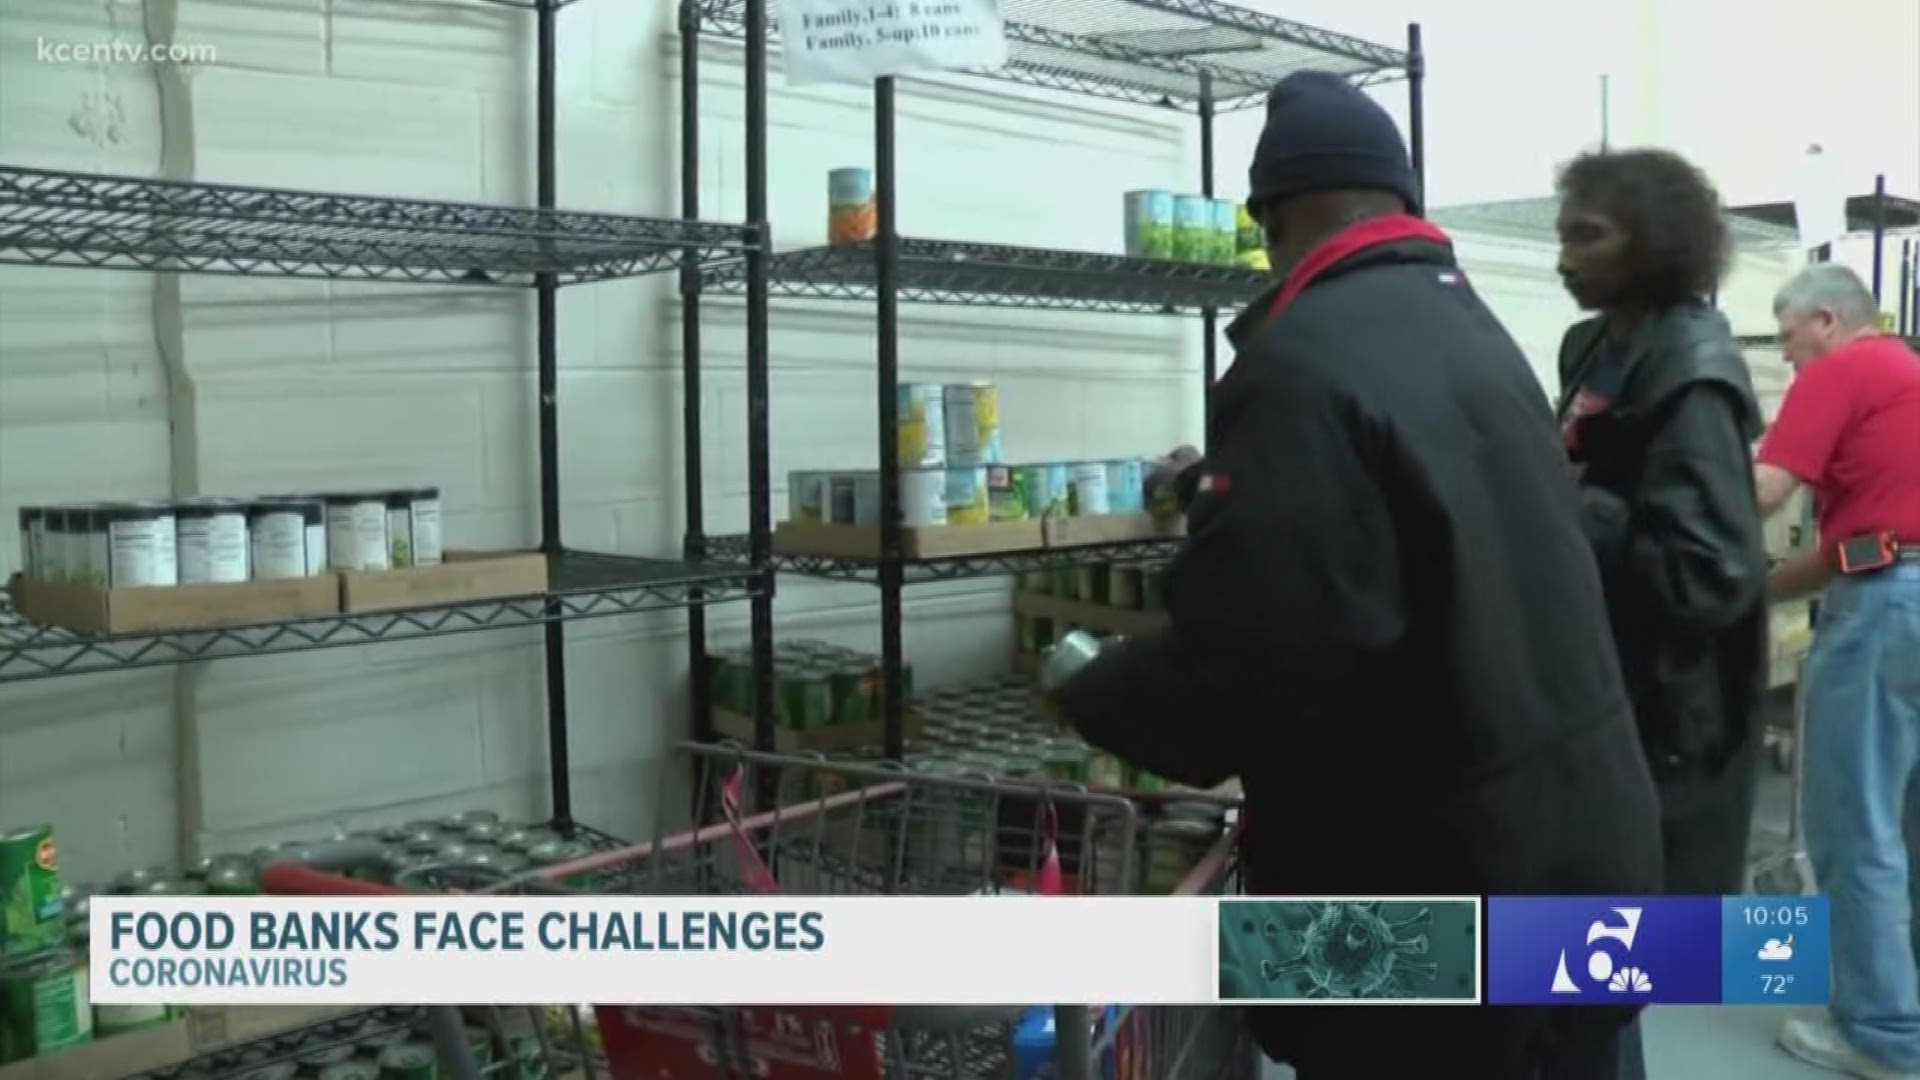 Food pantries across Central Texas have seen dramatic increases of people needing food as unemployment numbers have risen due to the coronavirus.